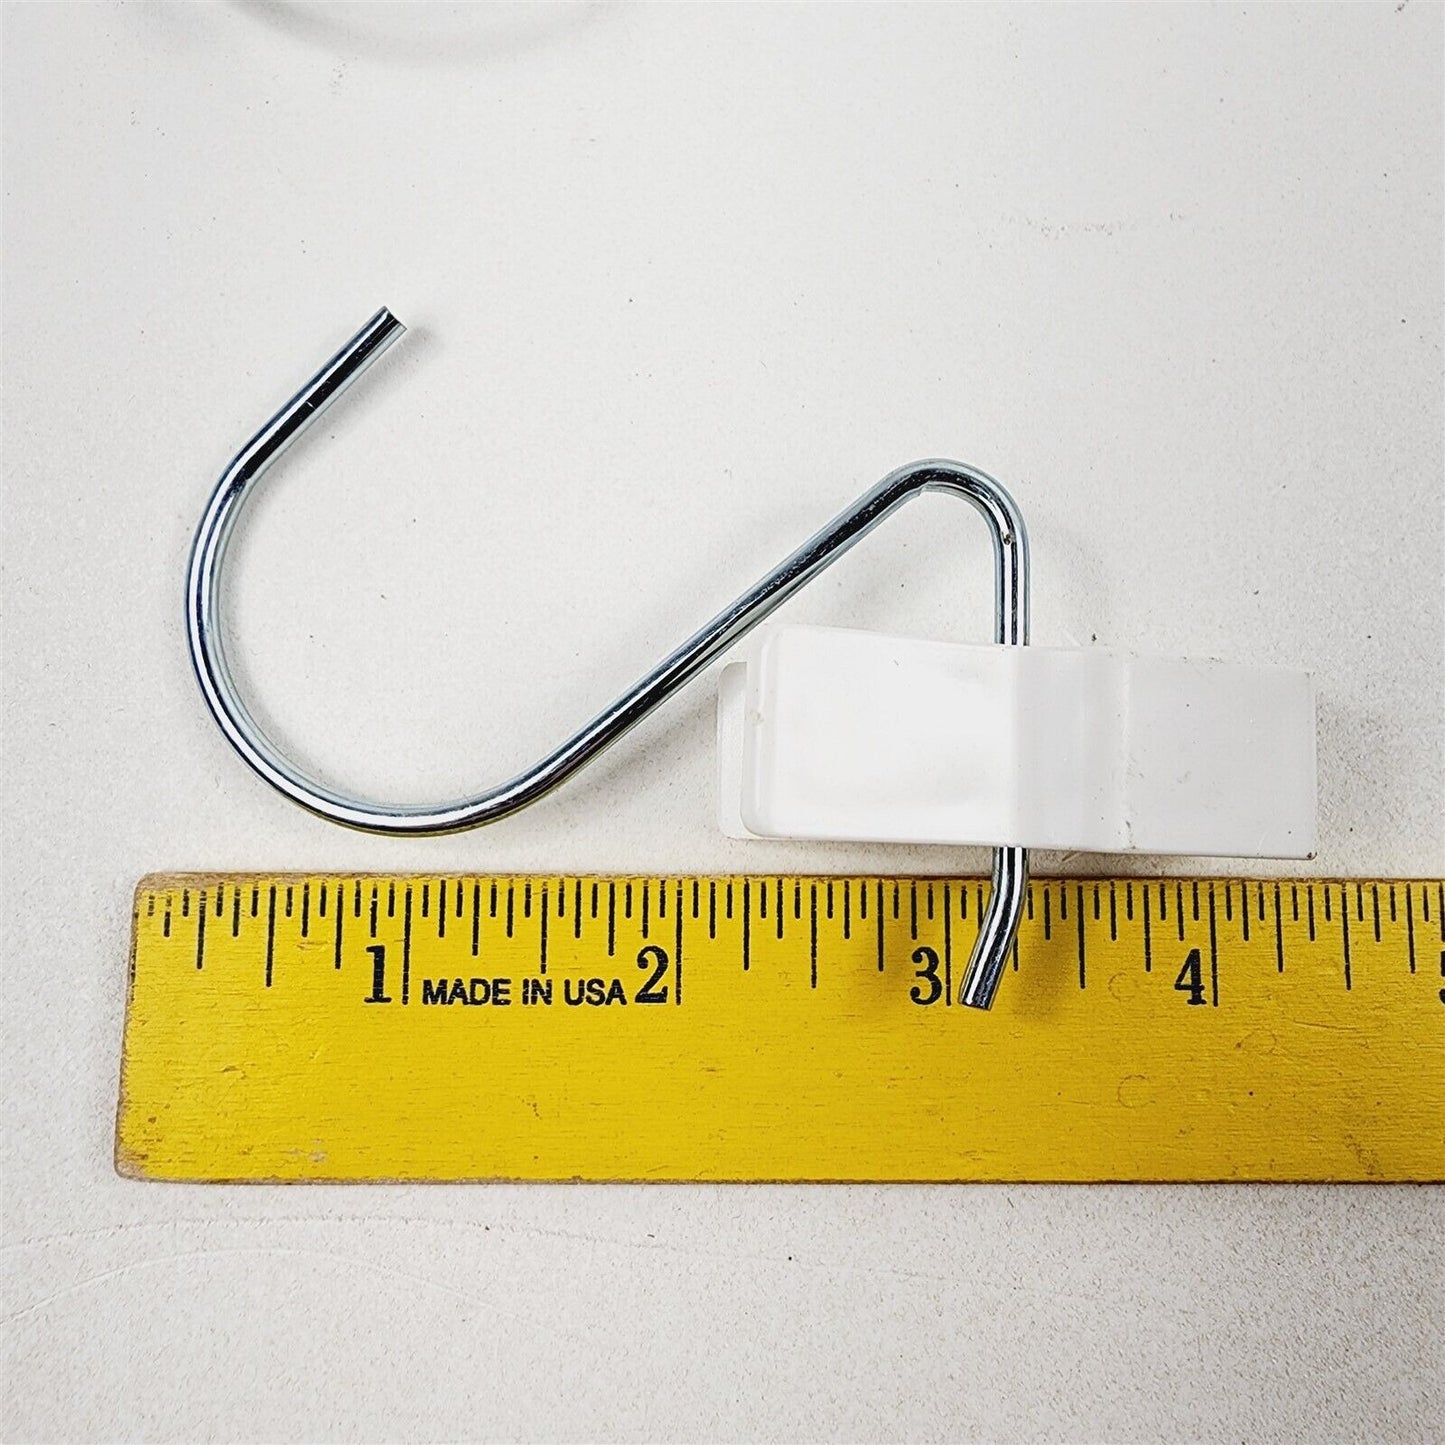 50 White Boot Clip Hangers Plastic Clip Metal Hook - Holds 4+ Lbs